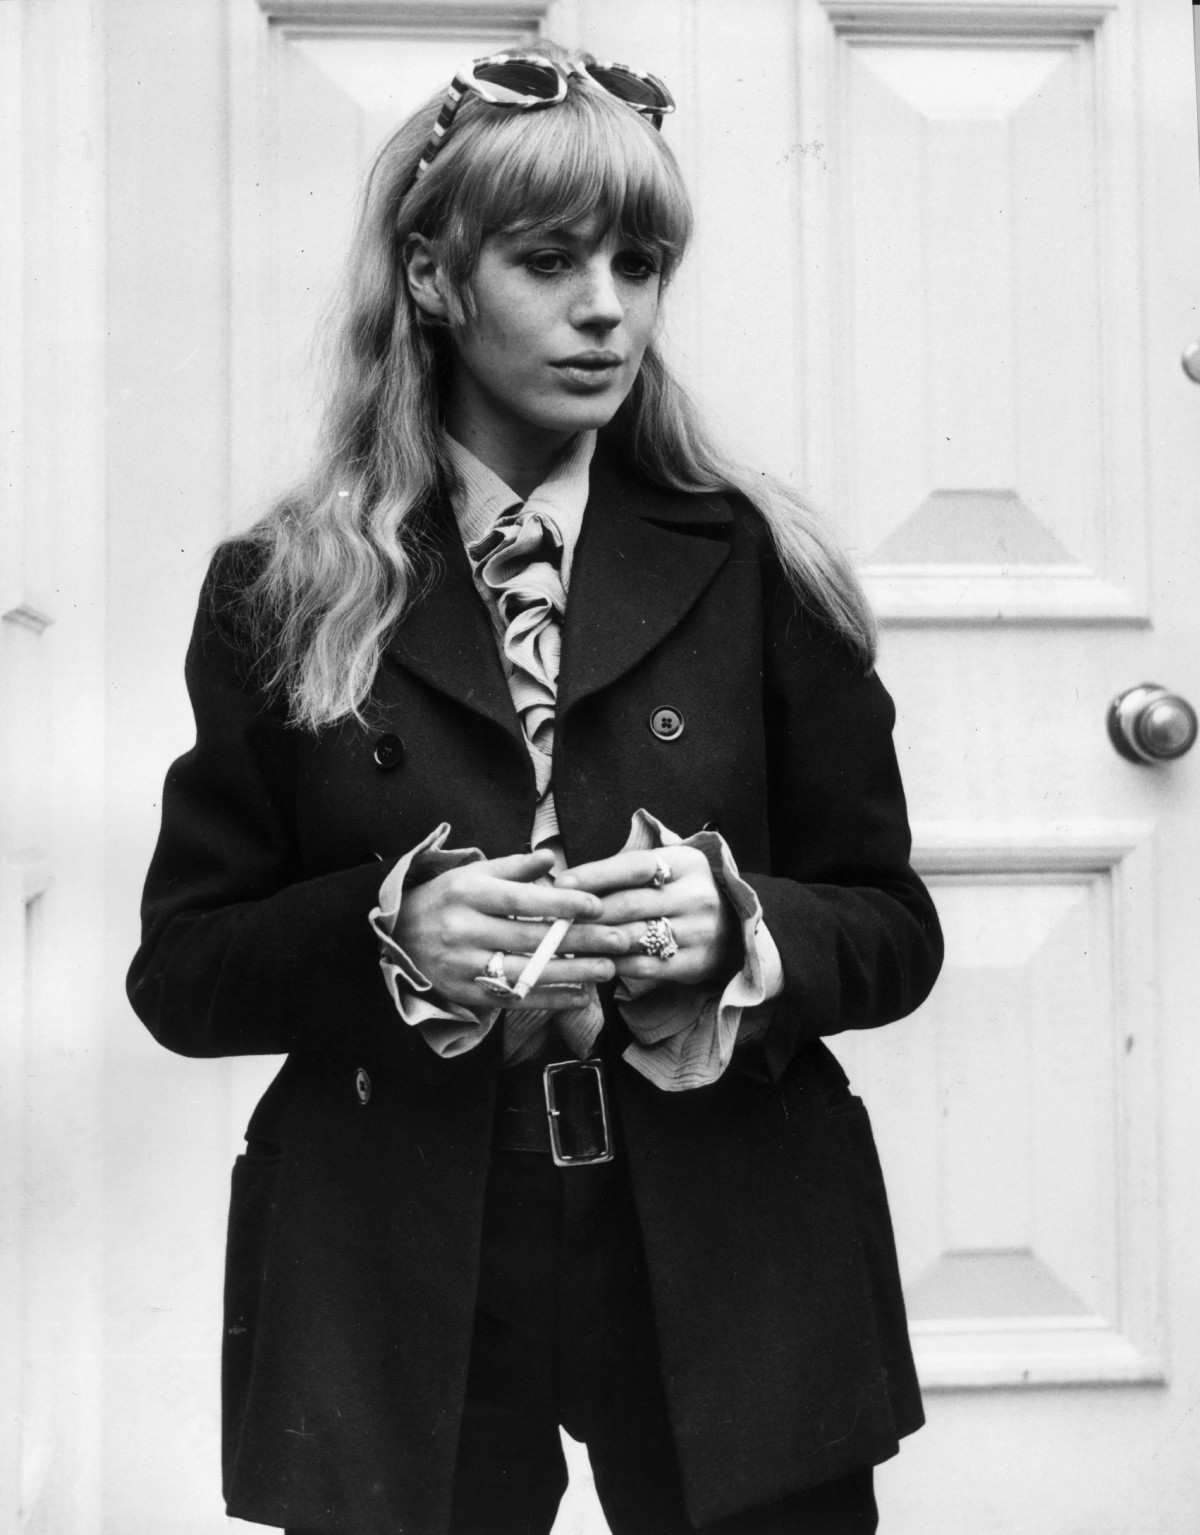 Gorgeous Marianne Faithfull in her youth...